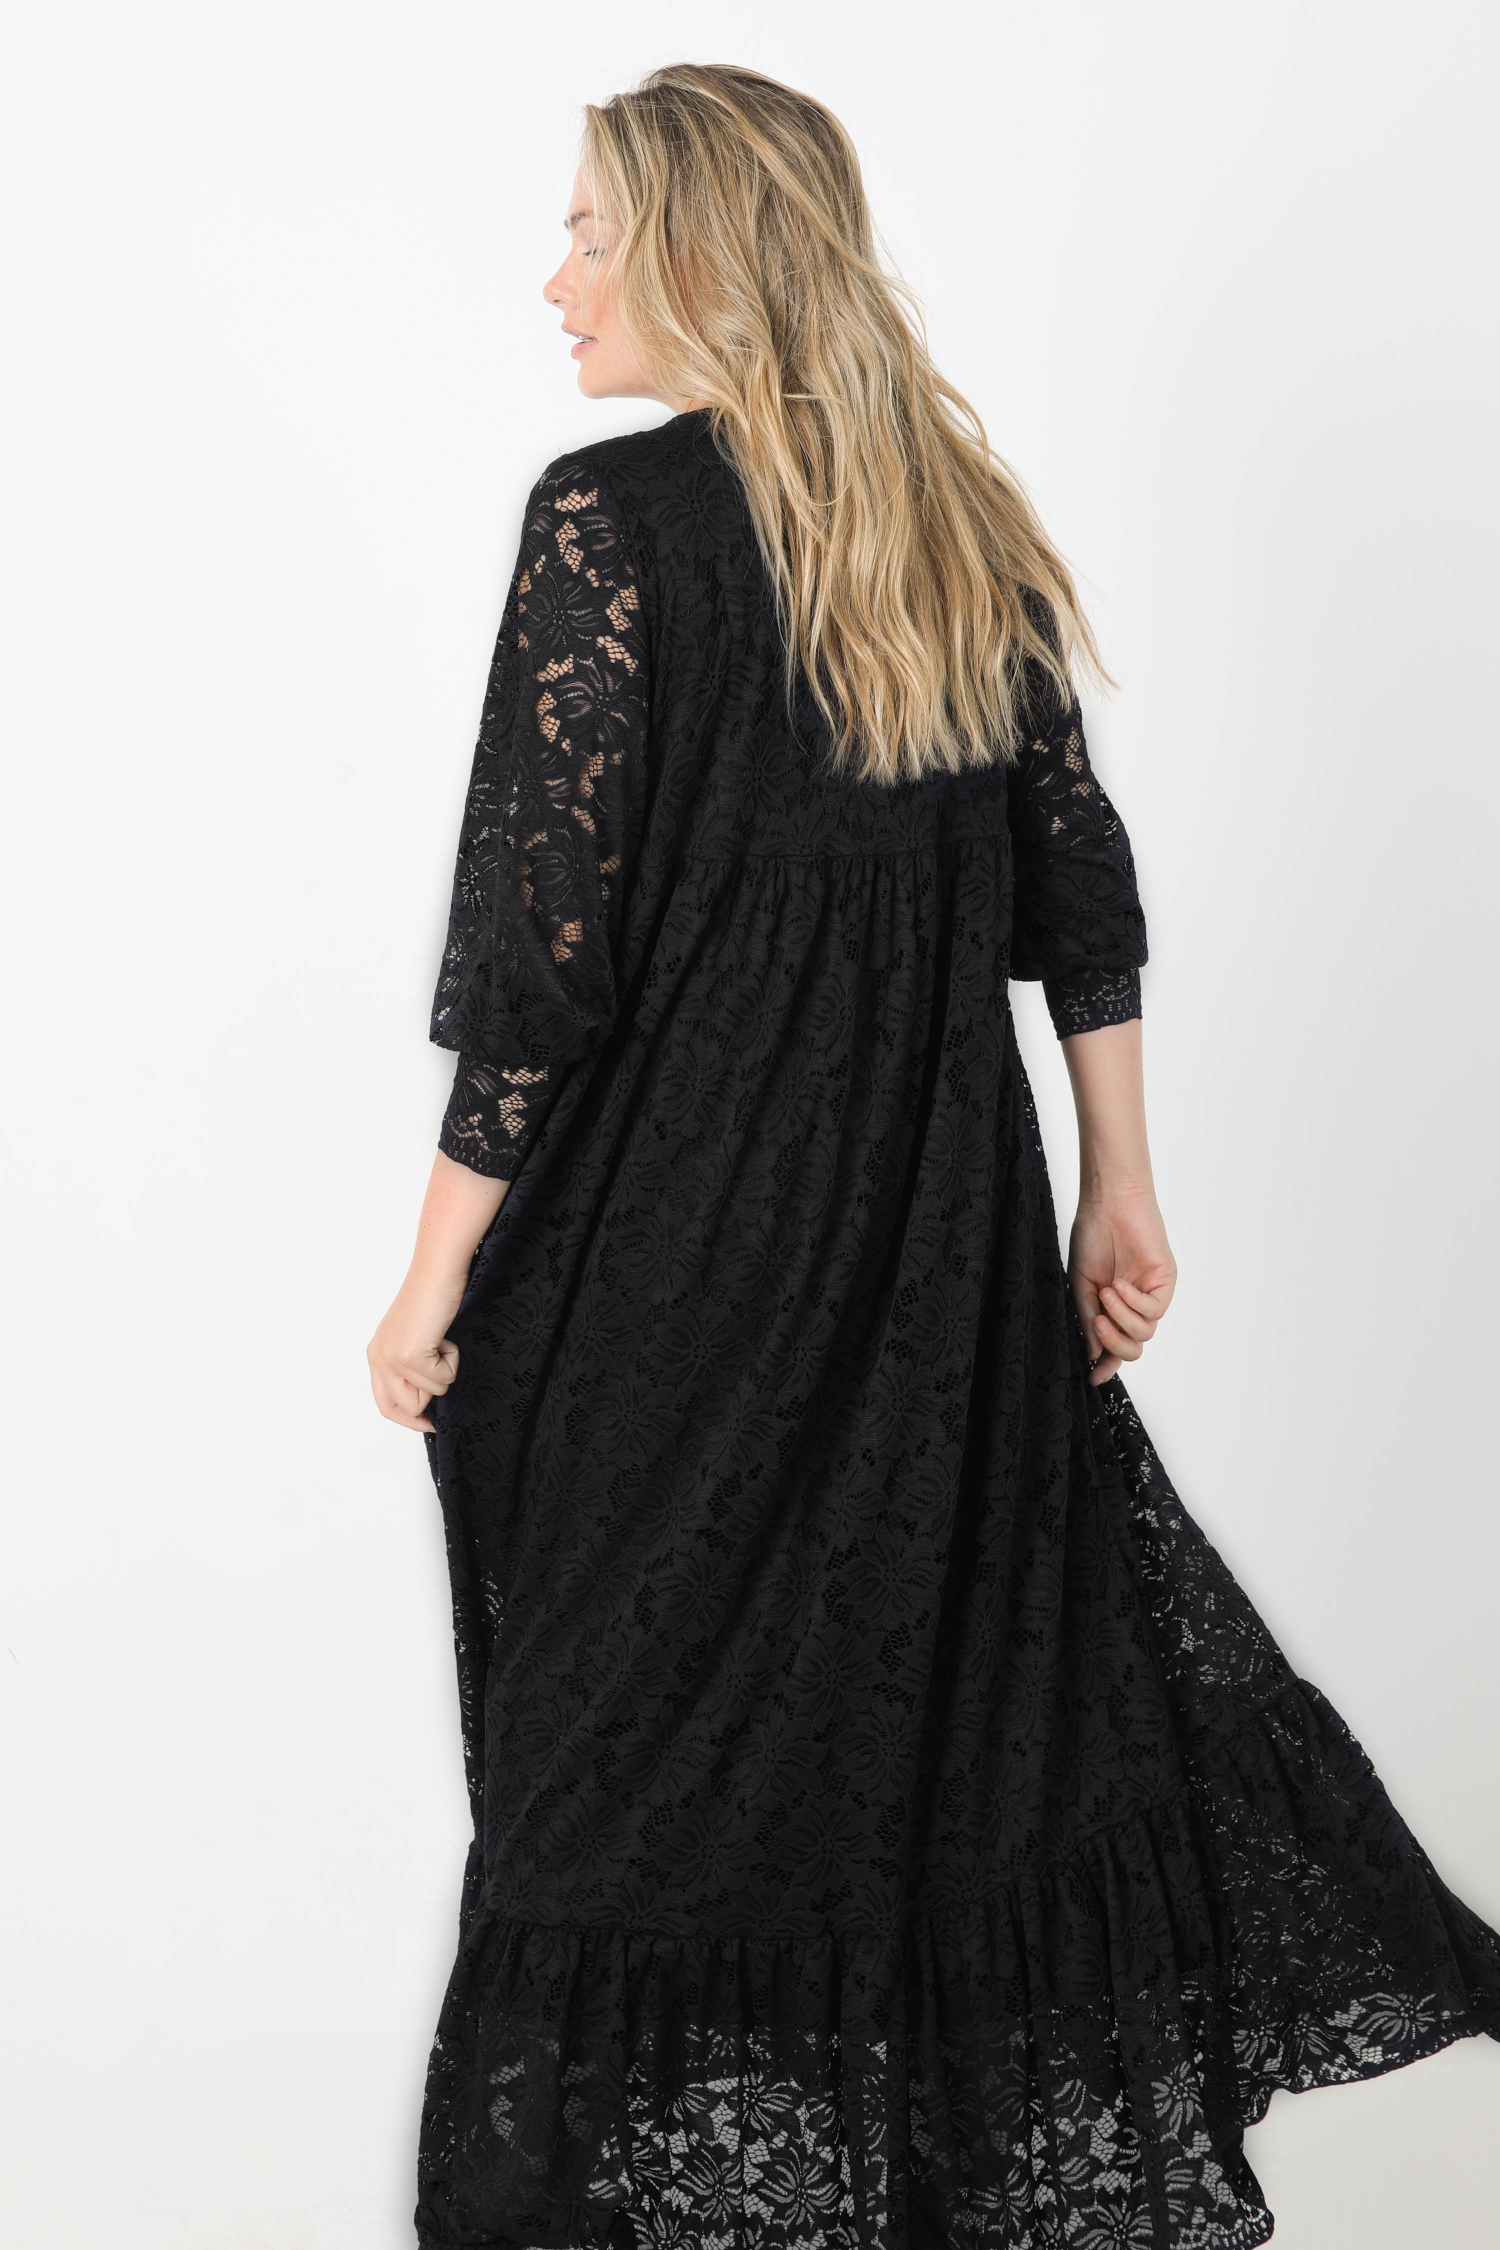 Bohemian style lace dress (expedition 25/31 October)